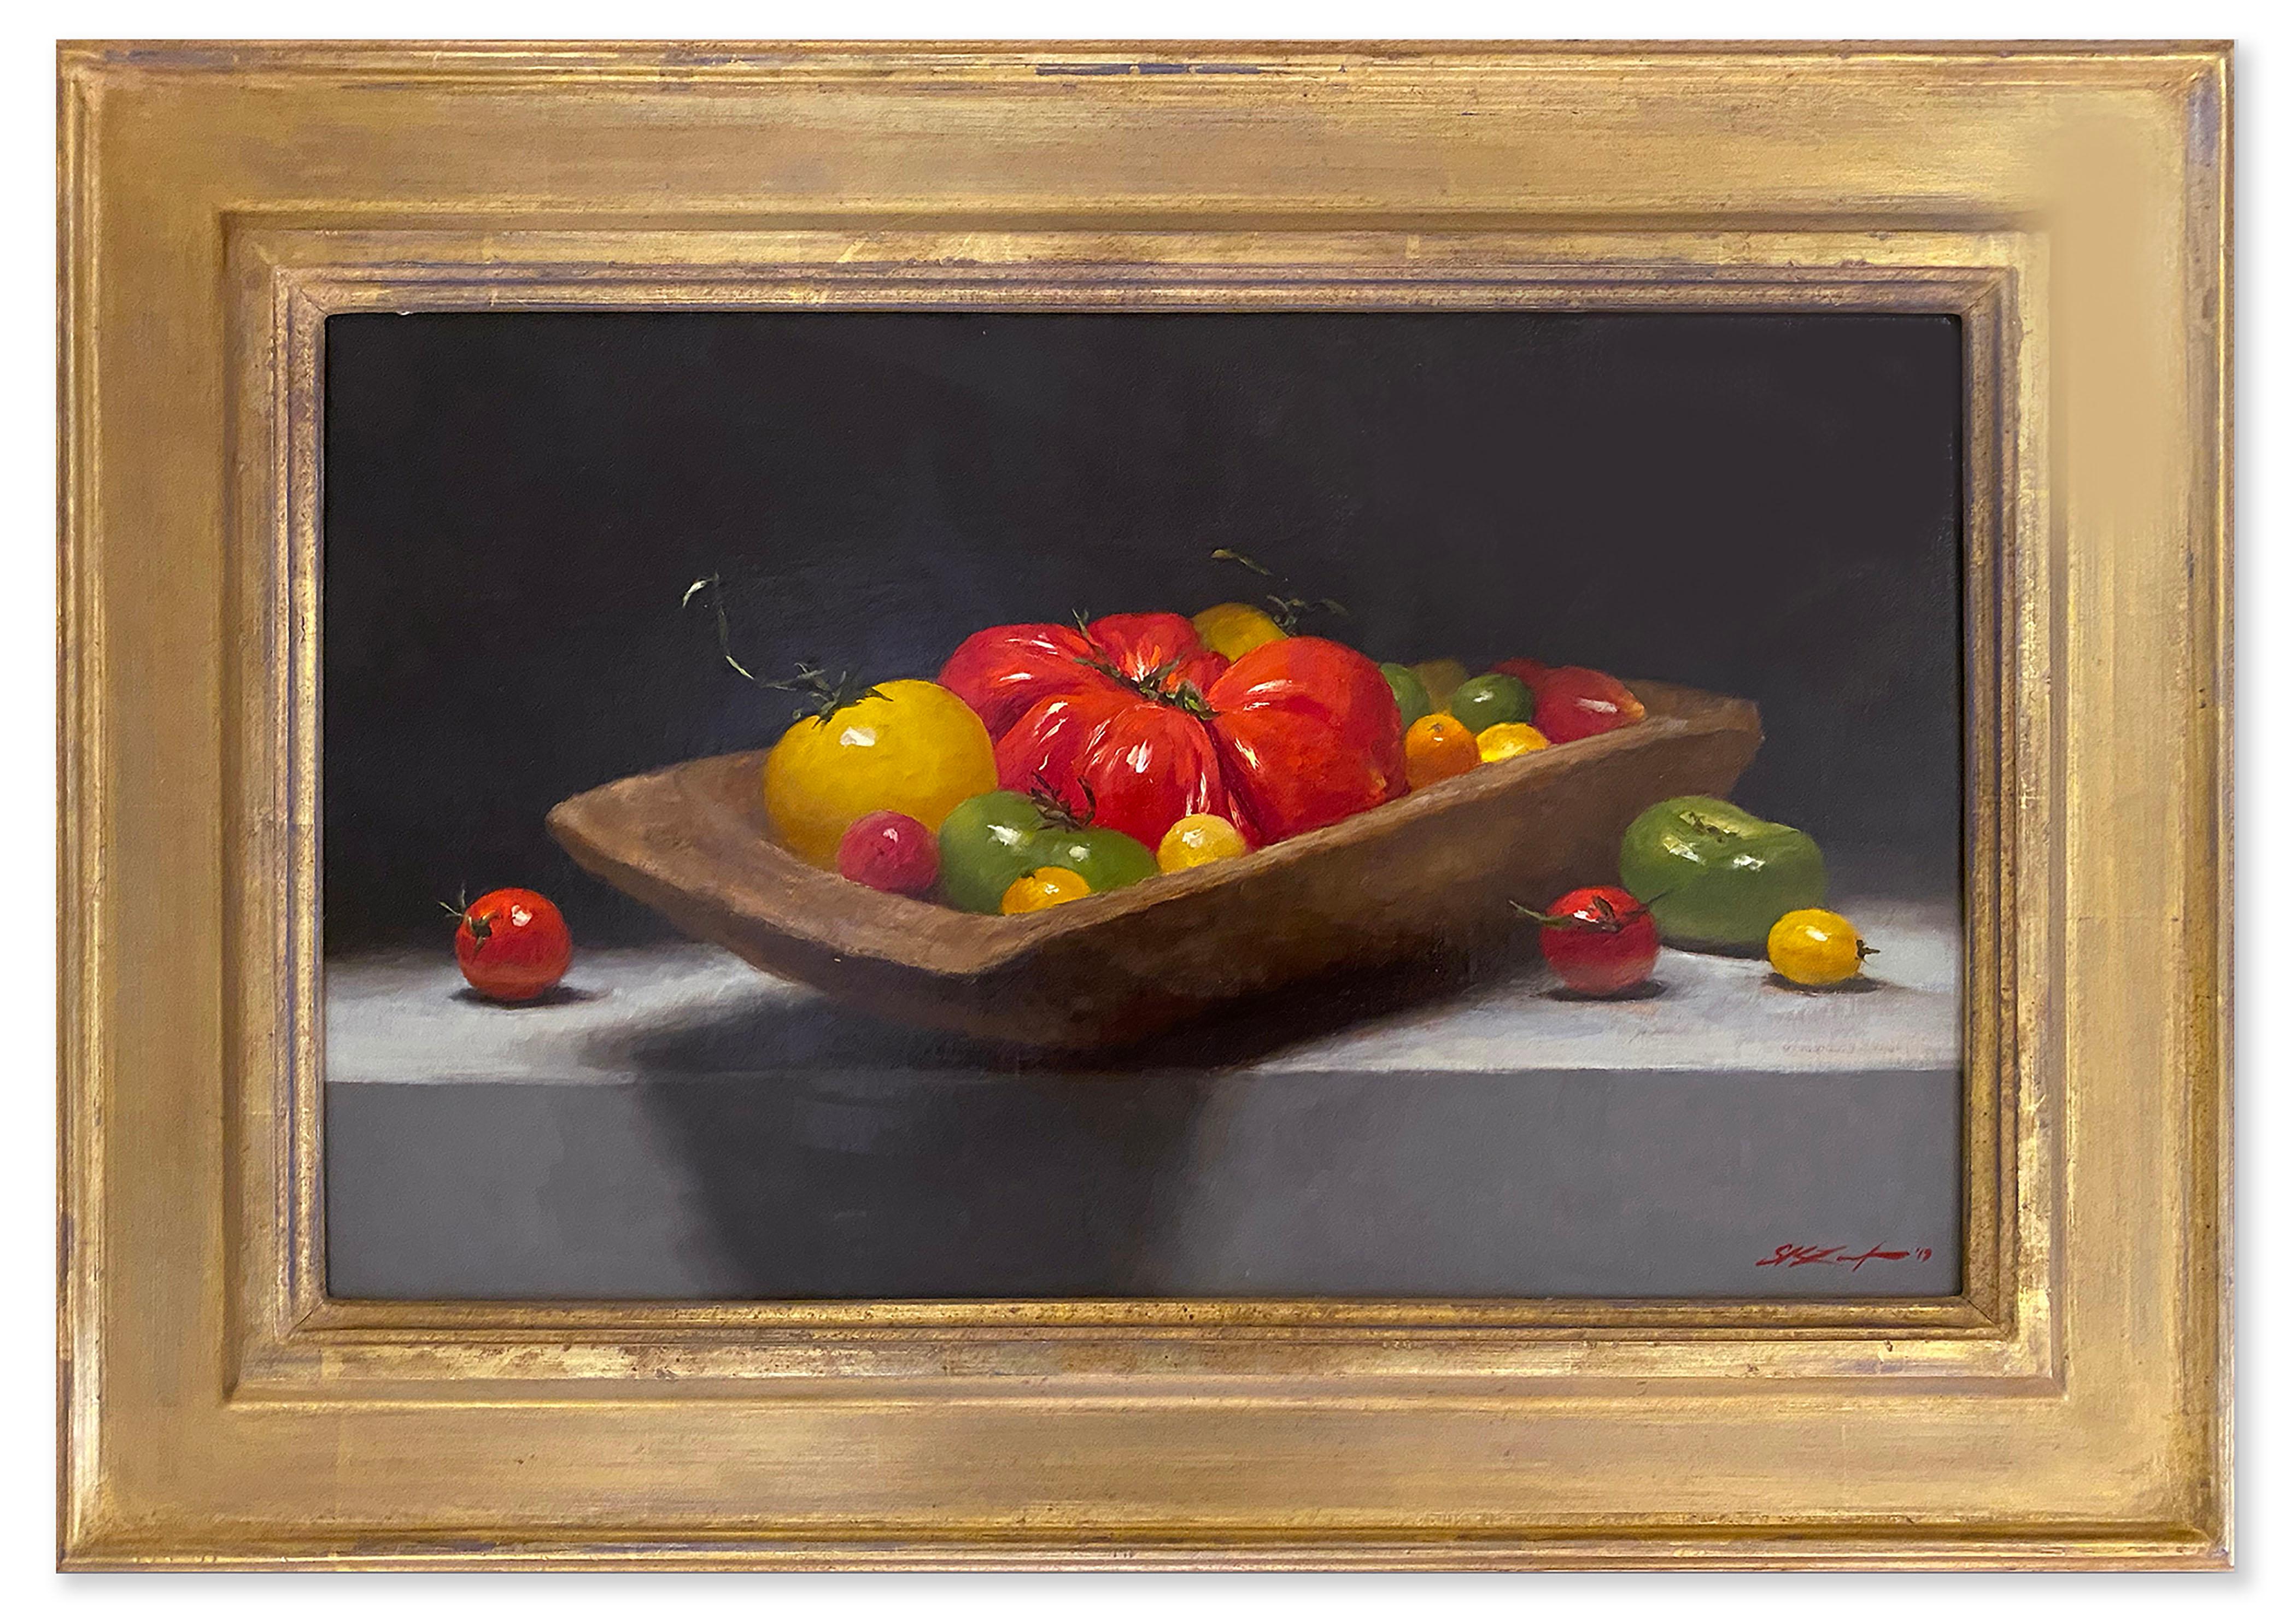 Heirloom Tomatoes (still life, fresh, full-bodied, orange-red, yellow, green) - Painting by Sarah Lamb